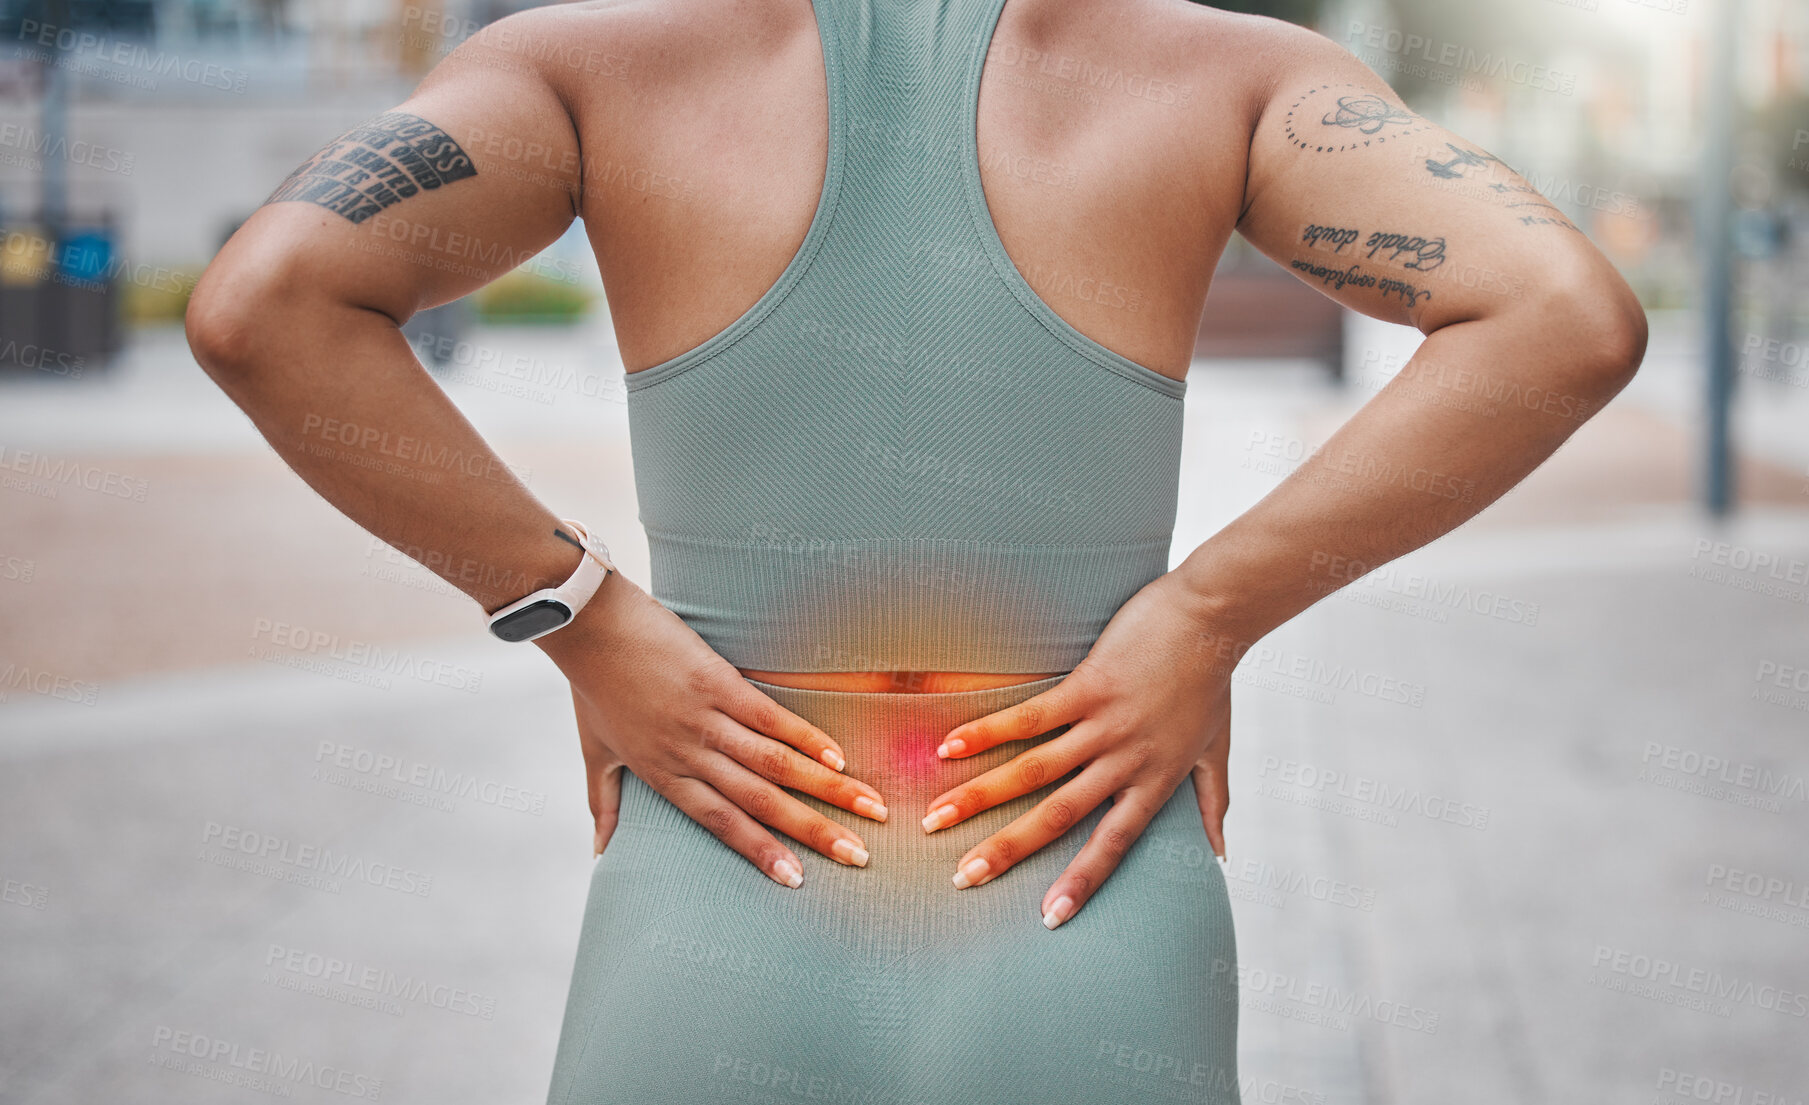 Buy stock photo Closeup shot of a young african american woman suffering with back pain while working out in the city. Superimposed cgi highlighting an injury where a female athlete is struggling with lower back ache